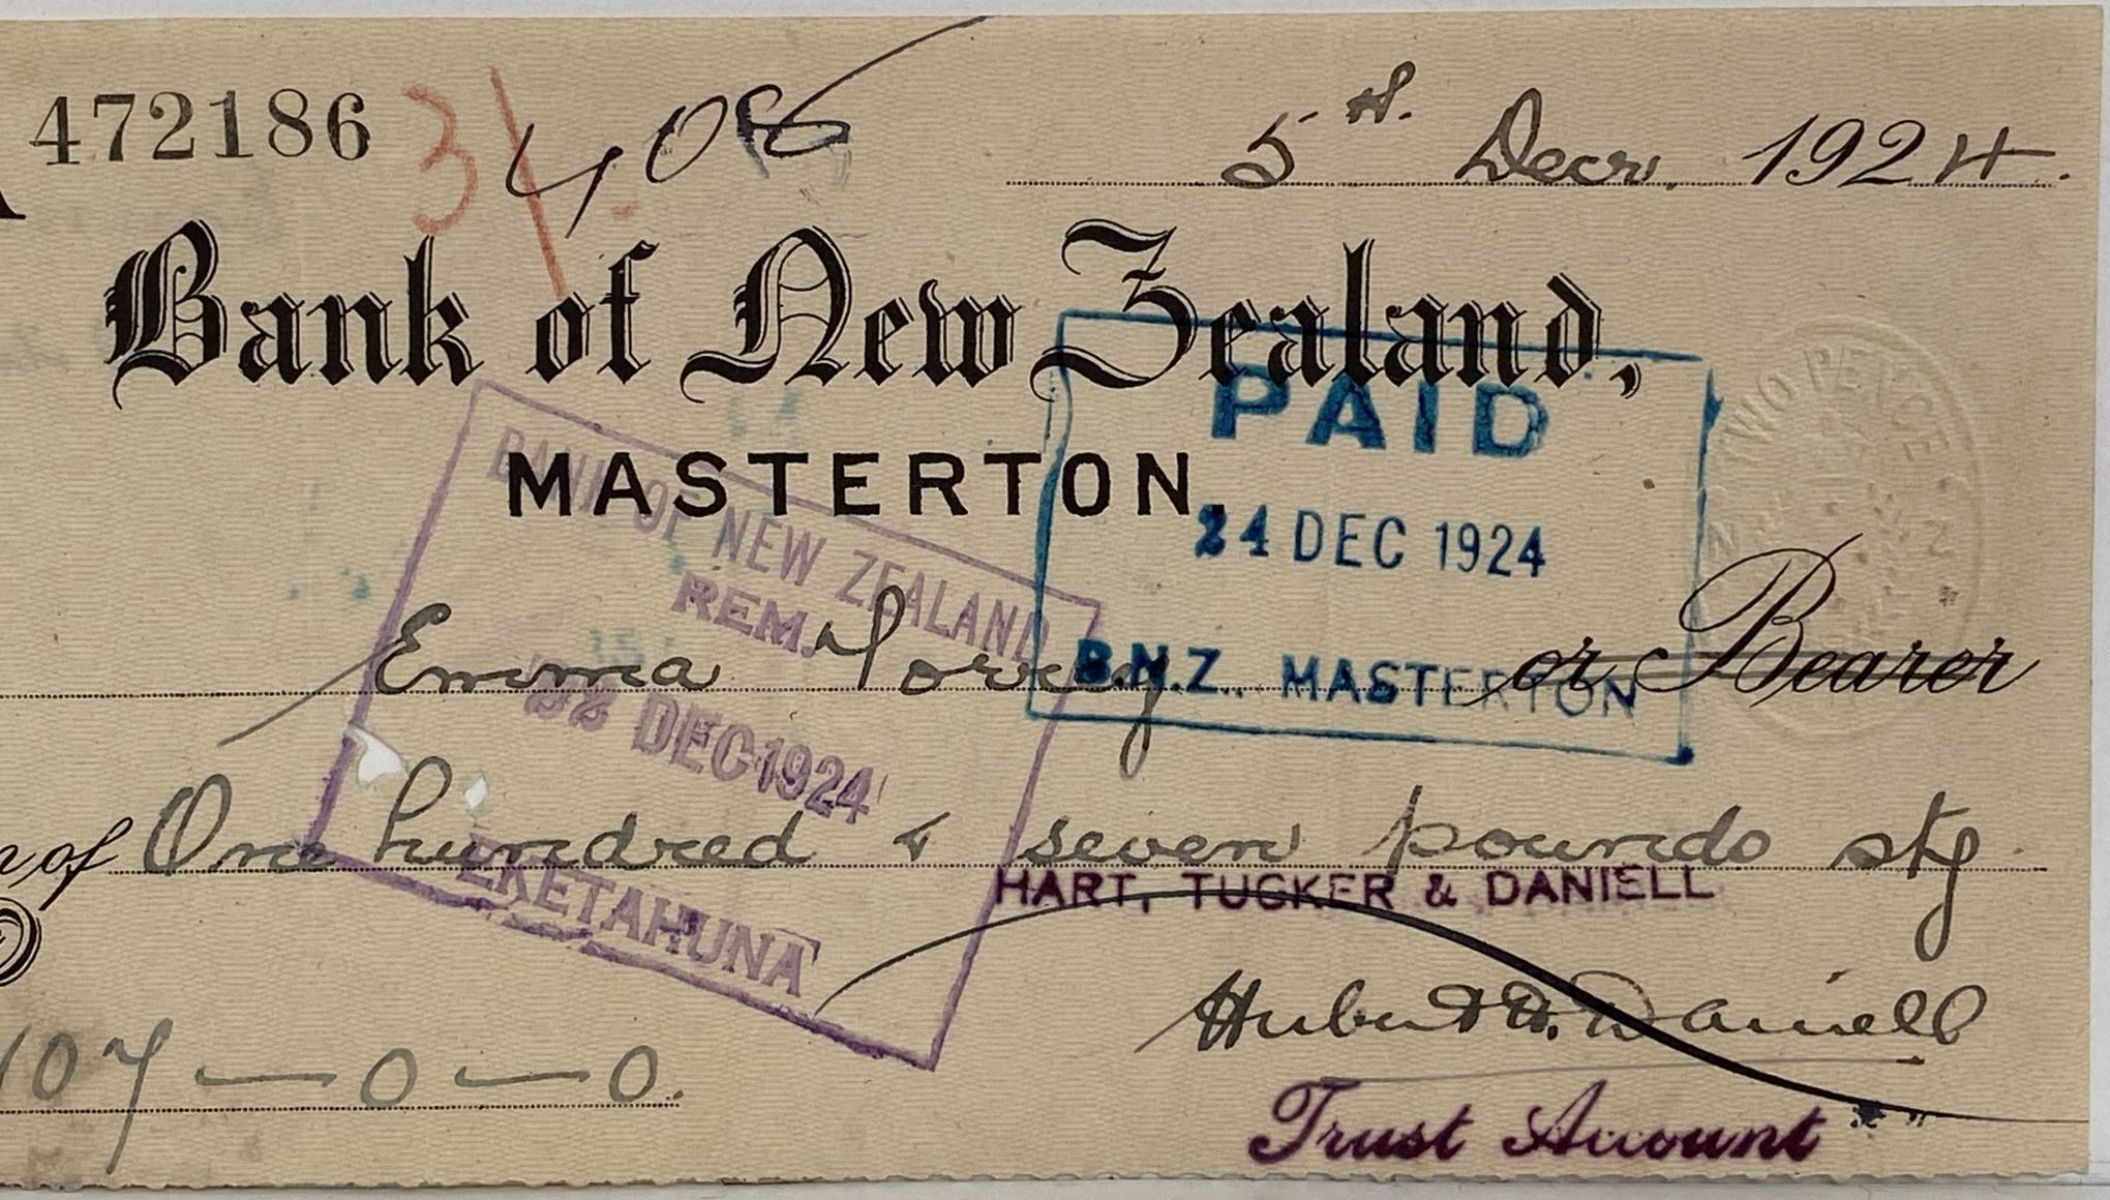 OLD BANKING MEMORABILIA: Bank cheque issued by BNZ Bank, Masterton 1924